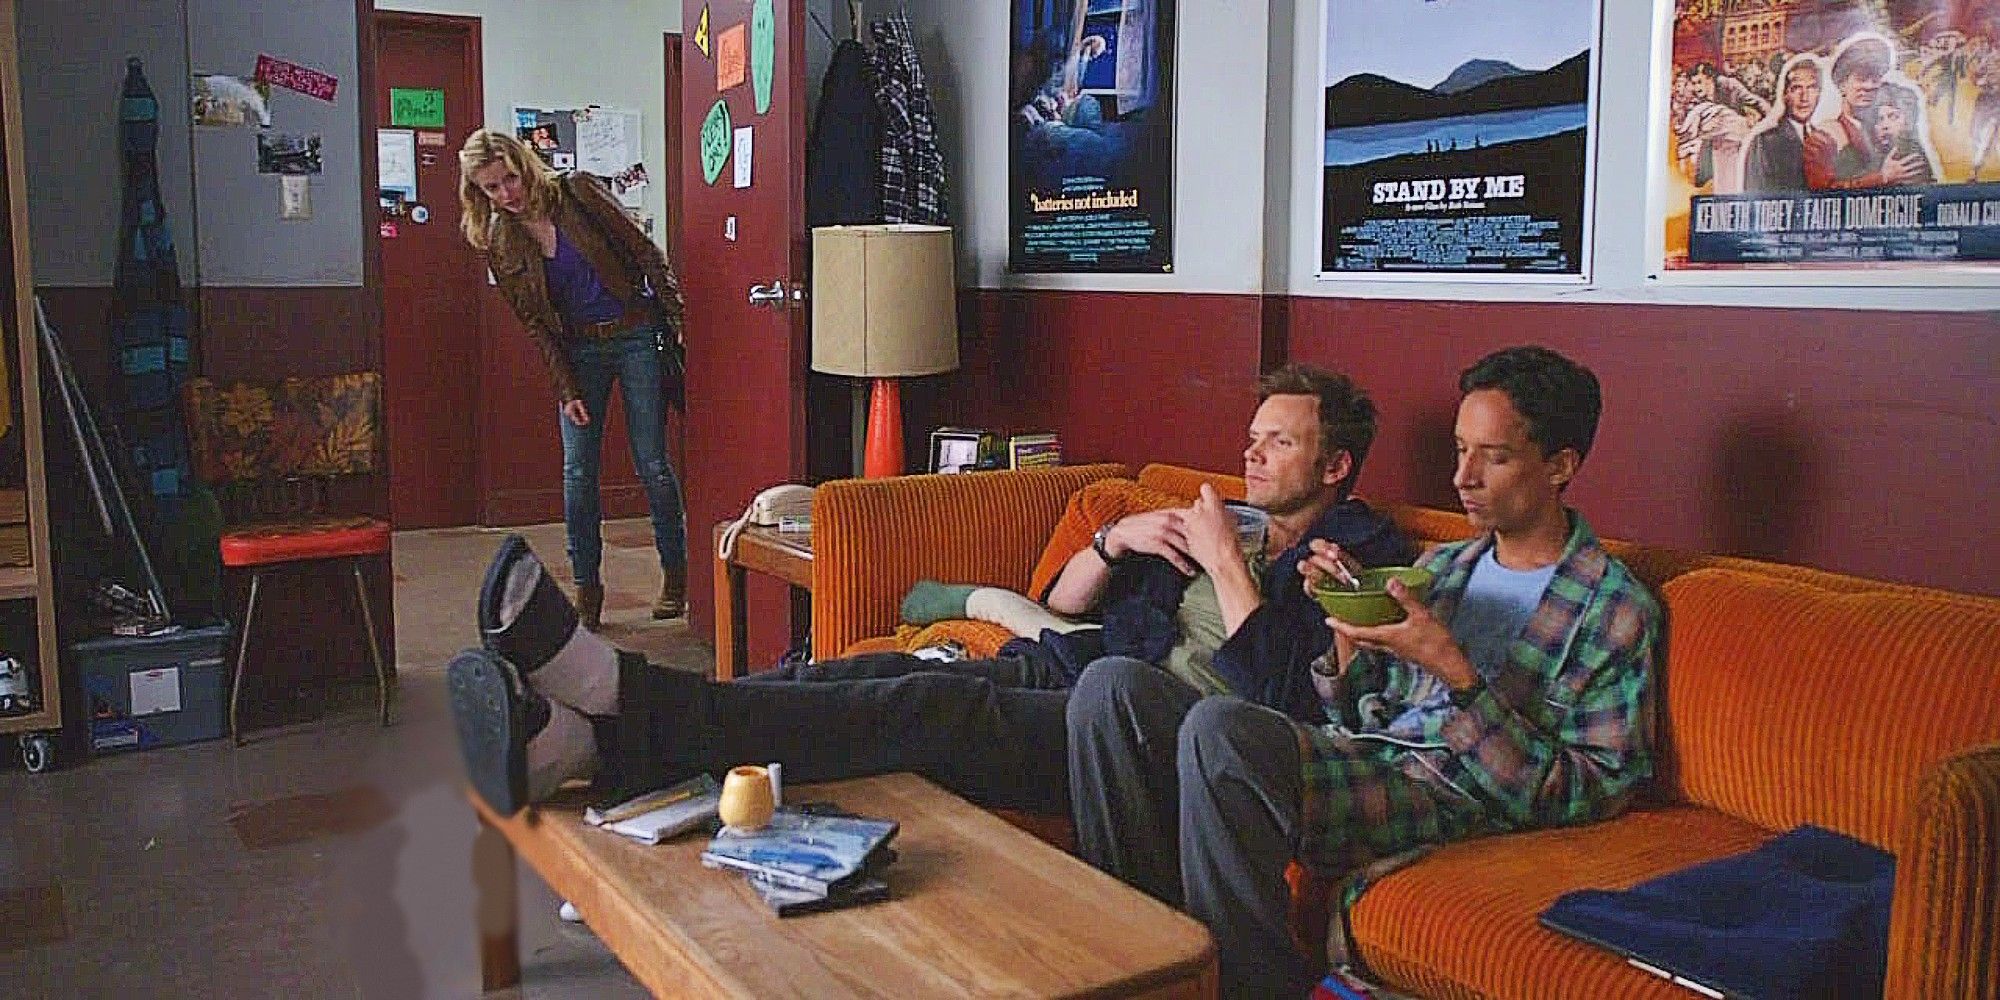 Britta visiting Jeff and Abed as they eat cereal in Abed's room in "Community"